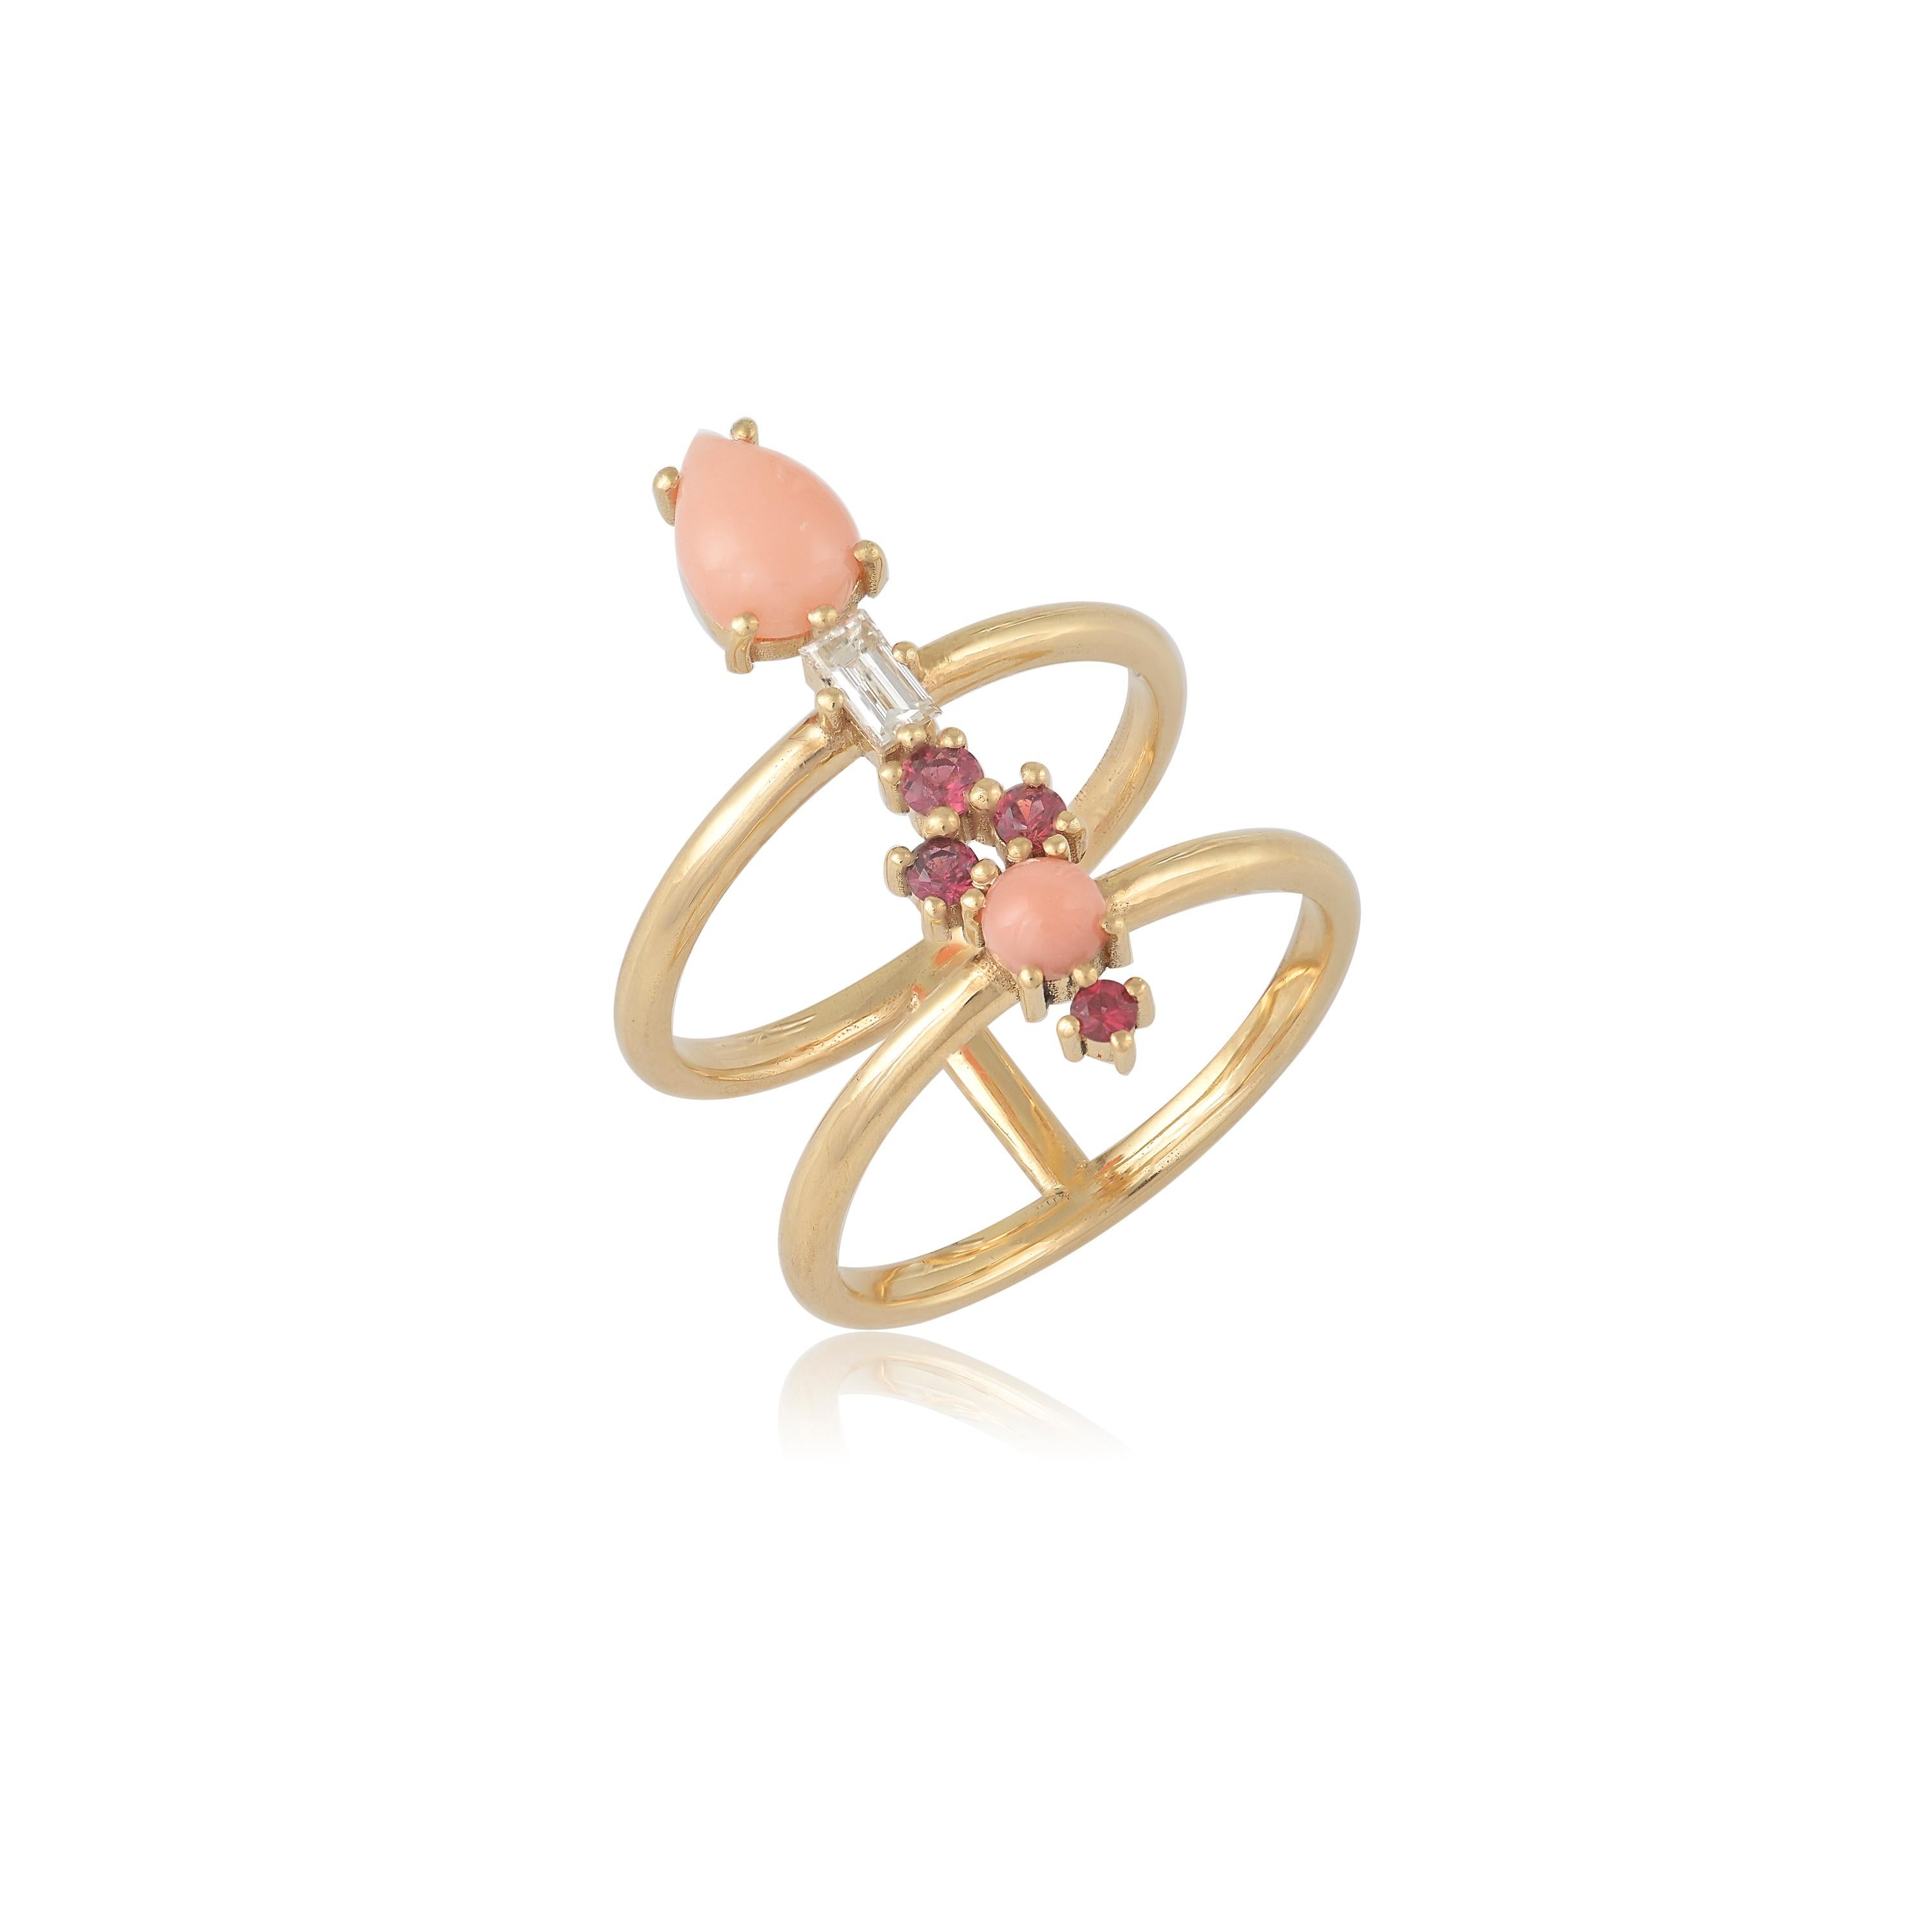 Designer: Alexia Gryllaki
Dimensions: L23x20mm
Ring Size UK N 1/2, US 7 1/2
Weight: approximately 4.6g  
Barcode: OFS020

Multi-stone ring in 18 karat yellow gold with round and pear shape cabochon angel-skin corals approx. 0.74cts, round faceted